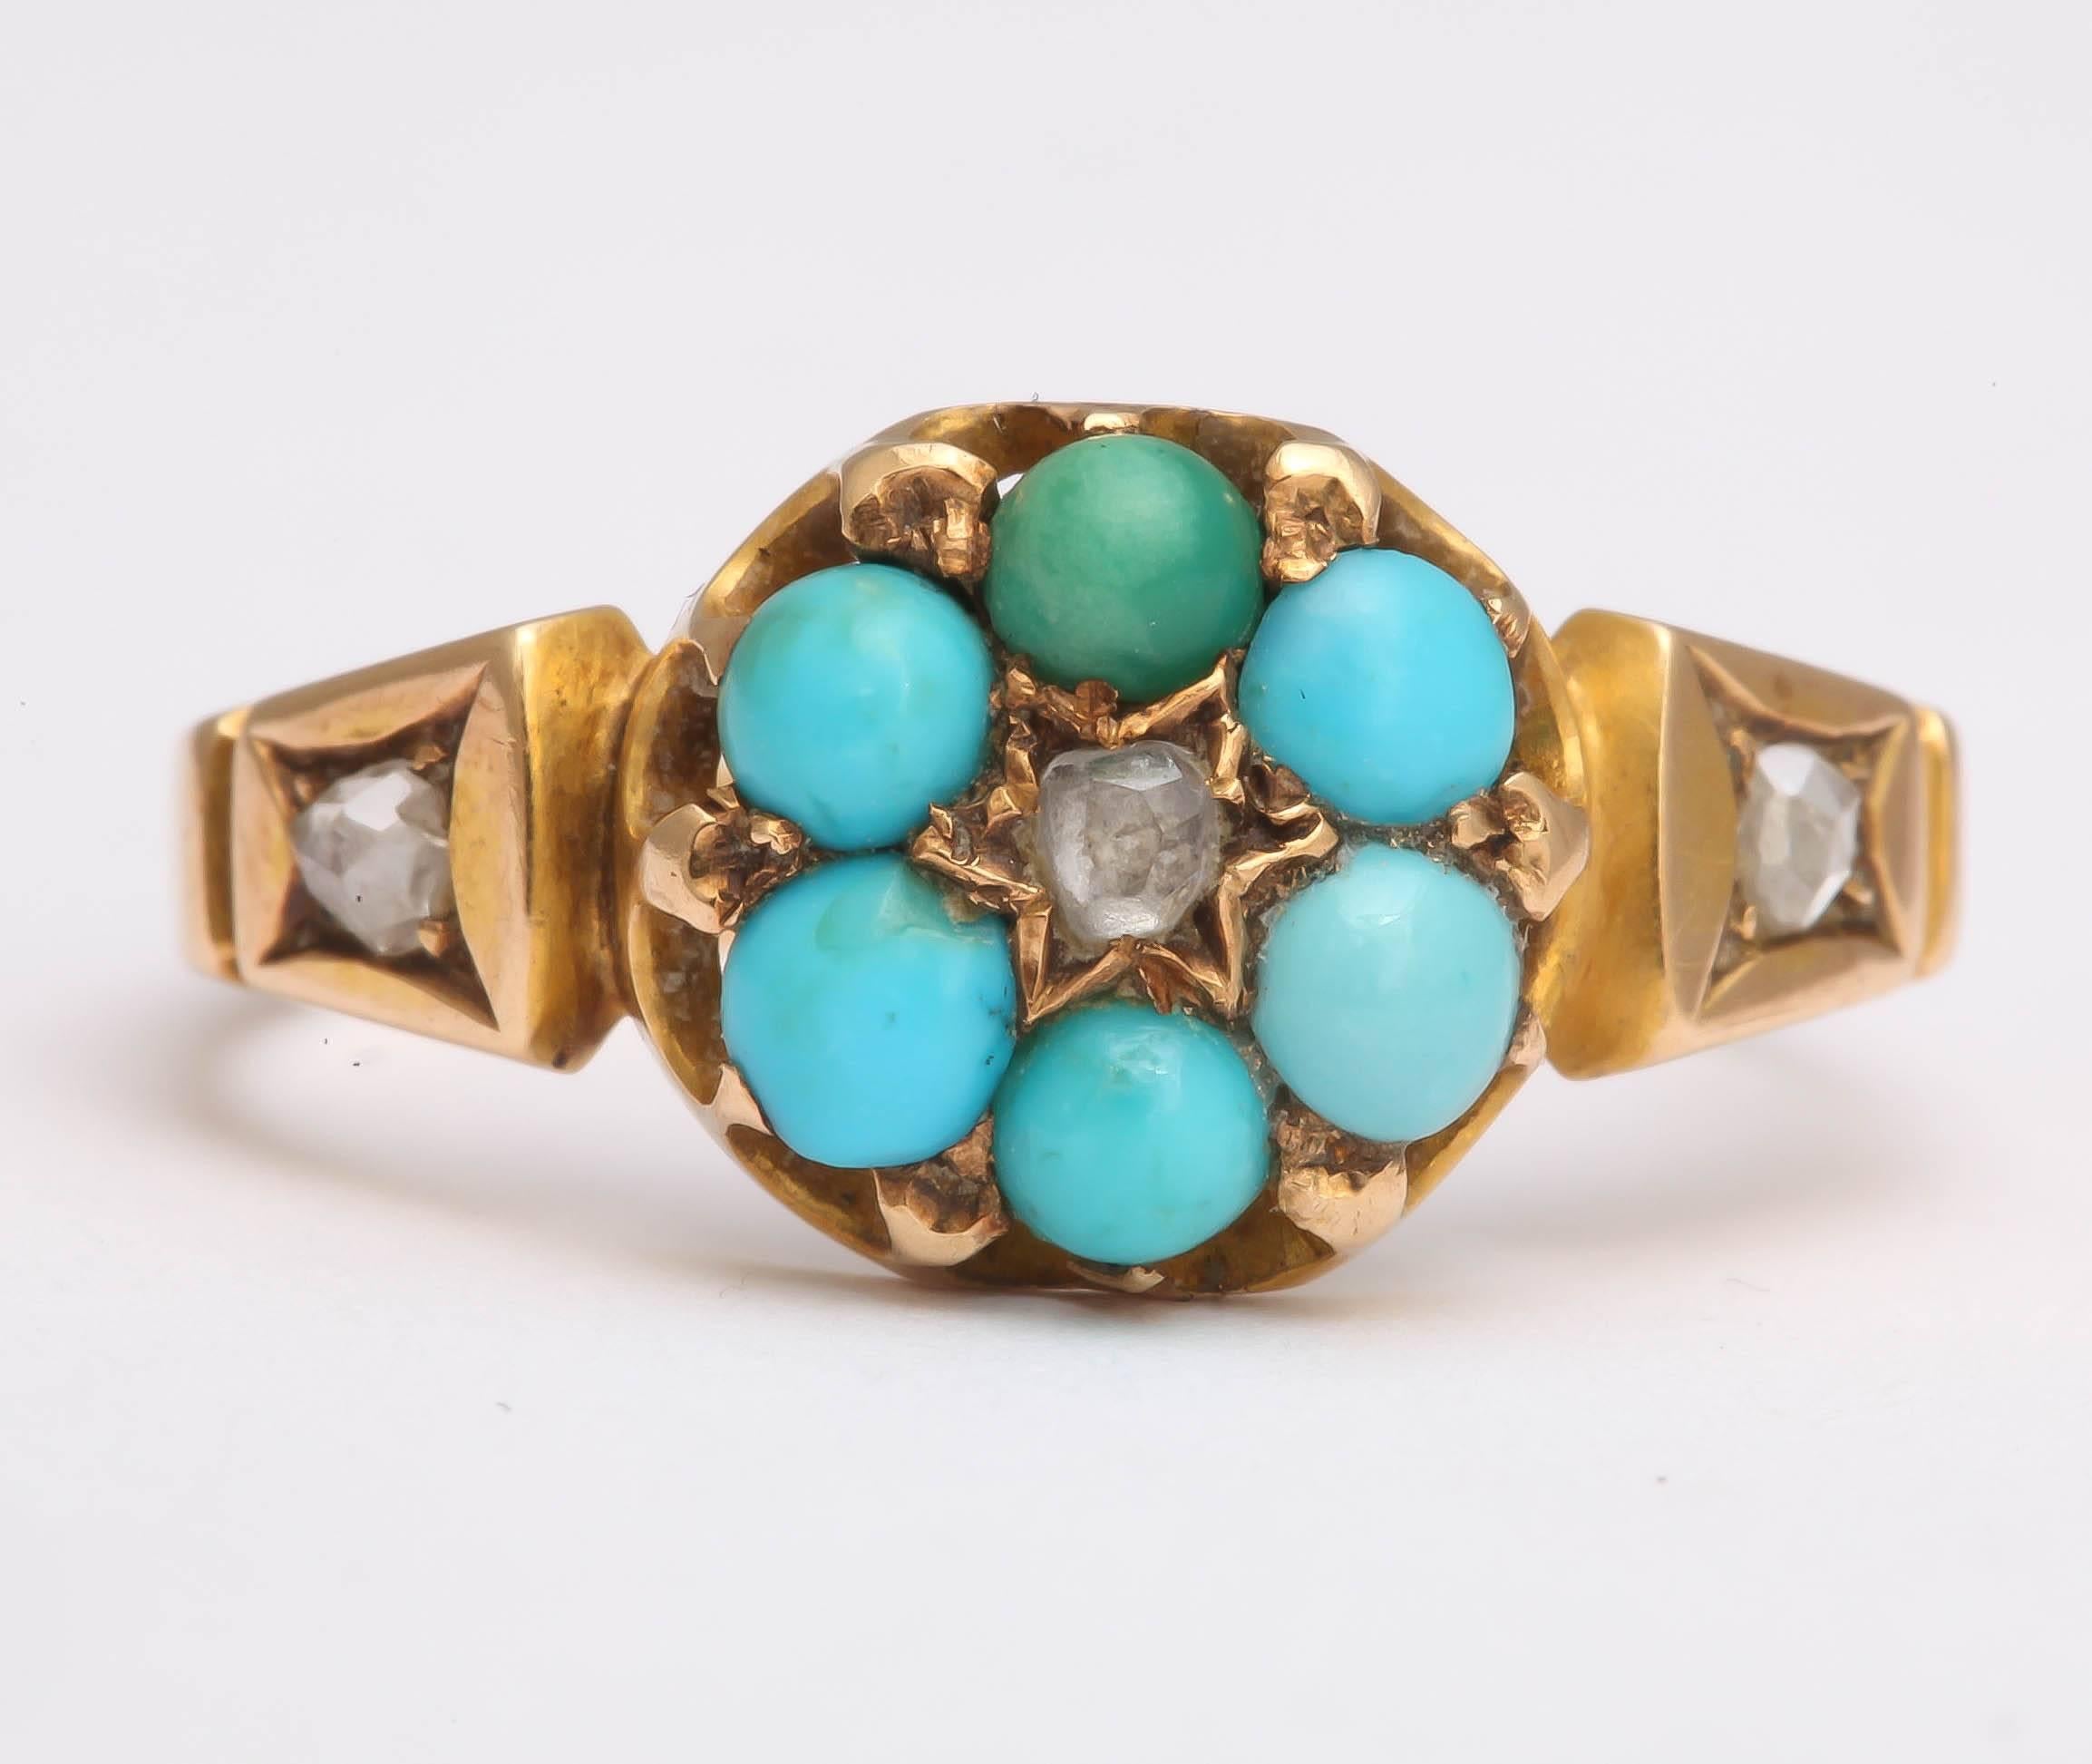 The lovely Victorian ring is a turquoise cluster consisting of six cabochon stones surrounding a rose cut diamond set in a star design. Each shoulder is also set with a rose cut diamond. The ring is English, 15K, and has hallmarks in the interior of